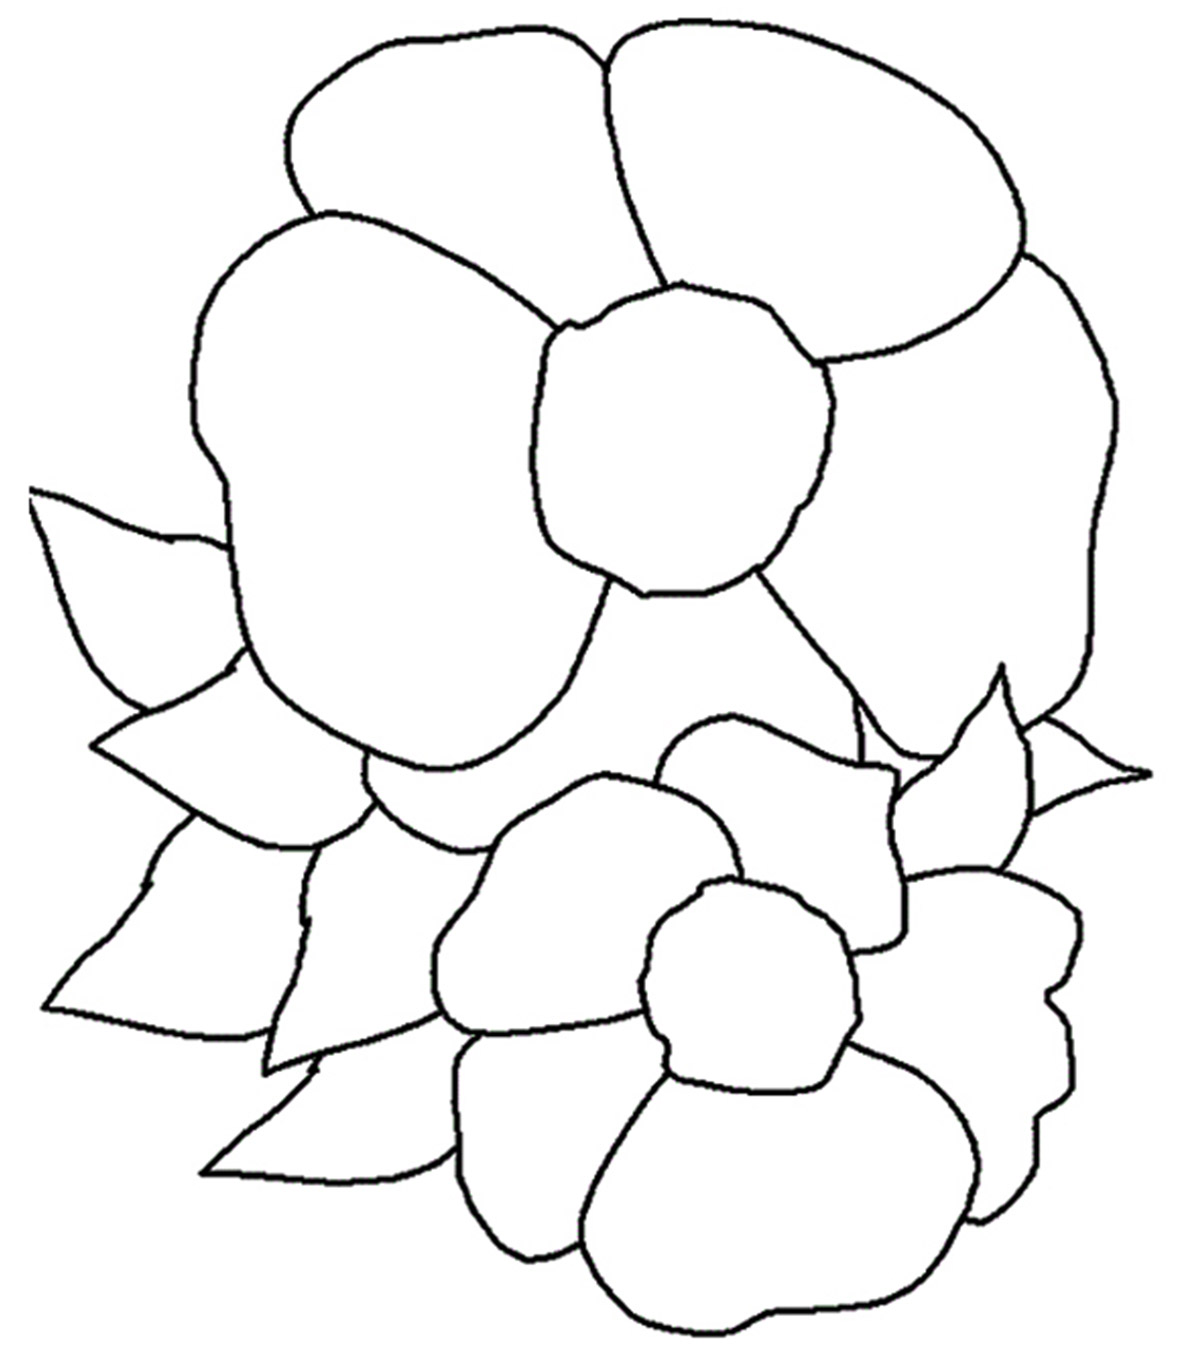 Download Top 25 Free Printable Beautiful Rose Coloring Pages For Kids